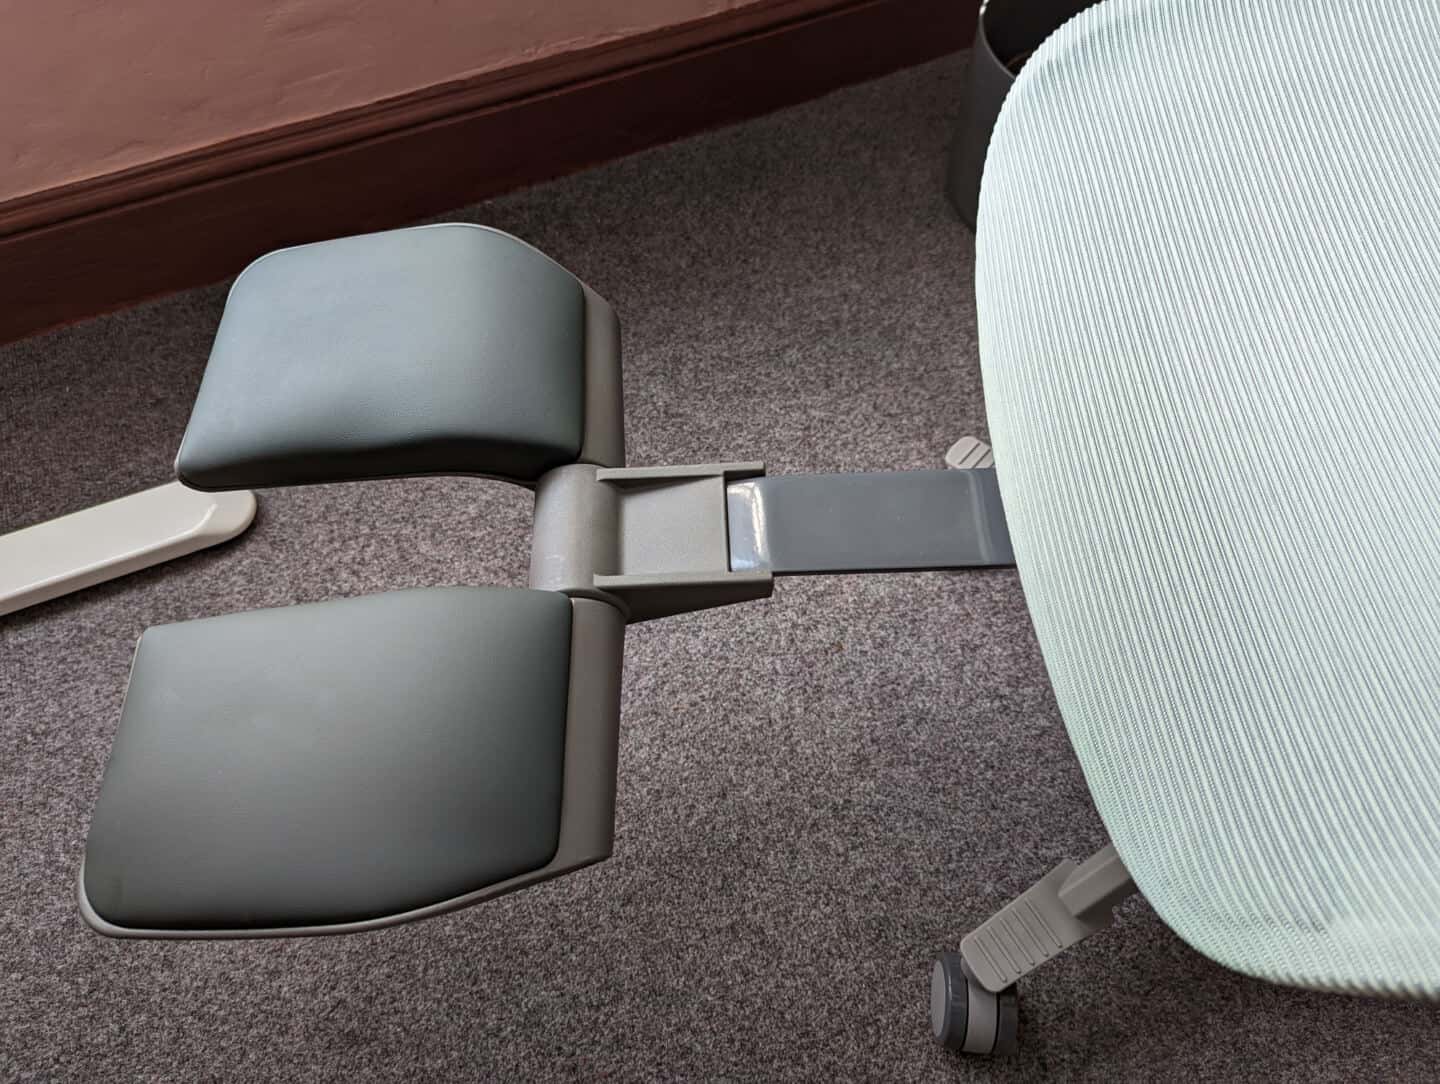 The legrests of the Hinomi H1 Pro Ergonomic Office Chair